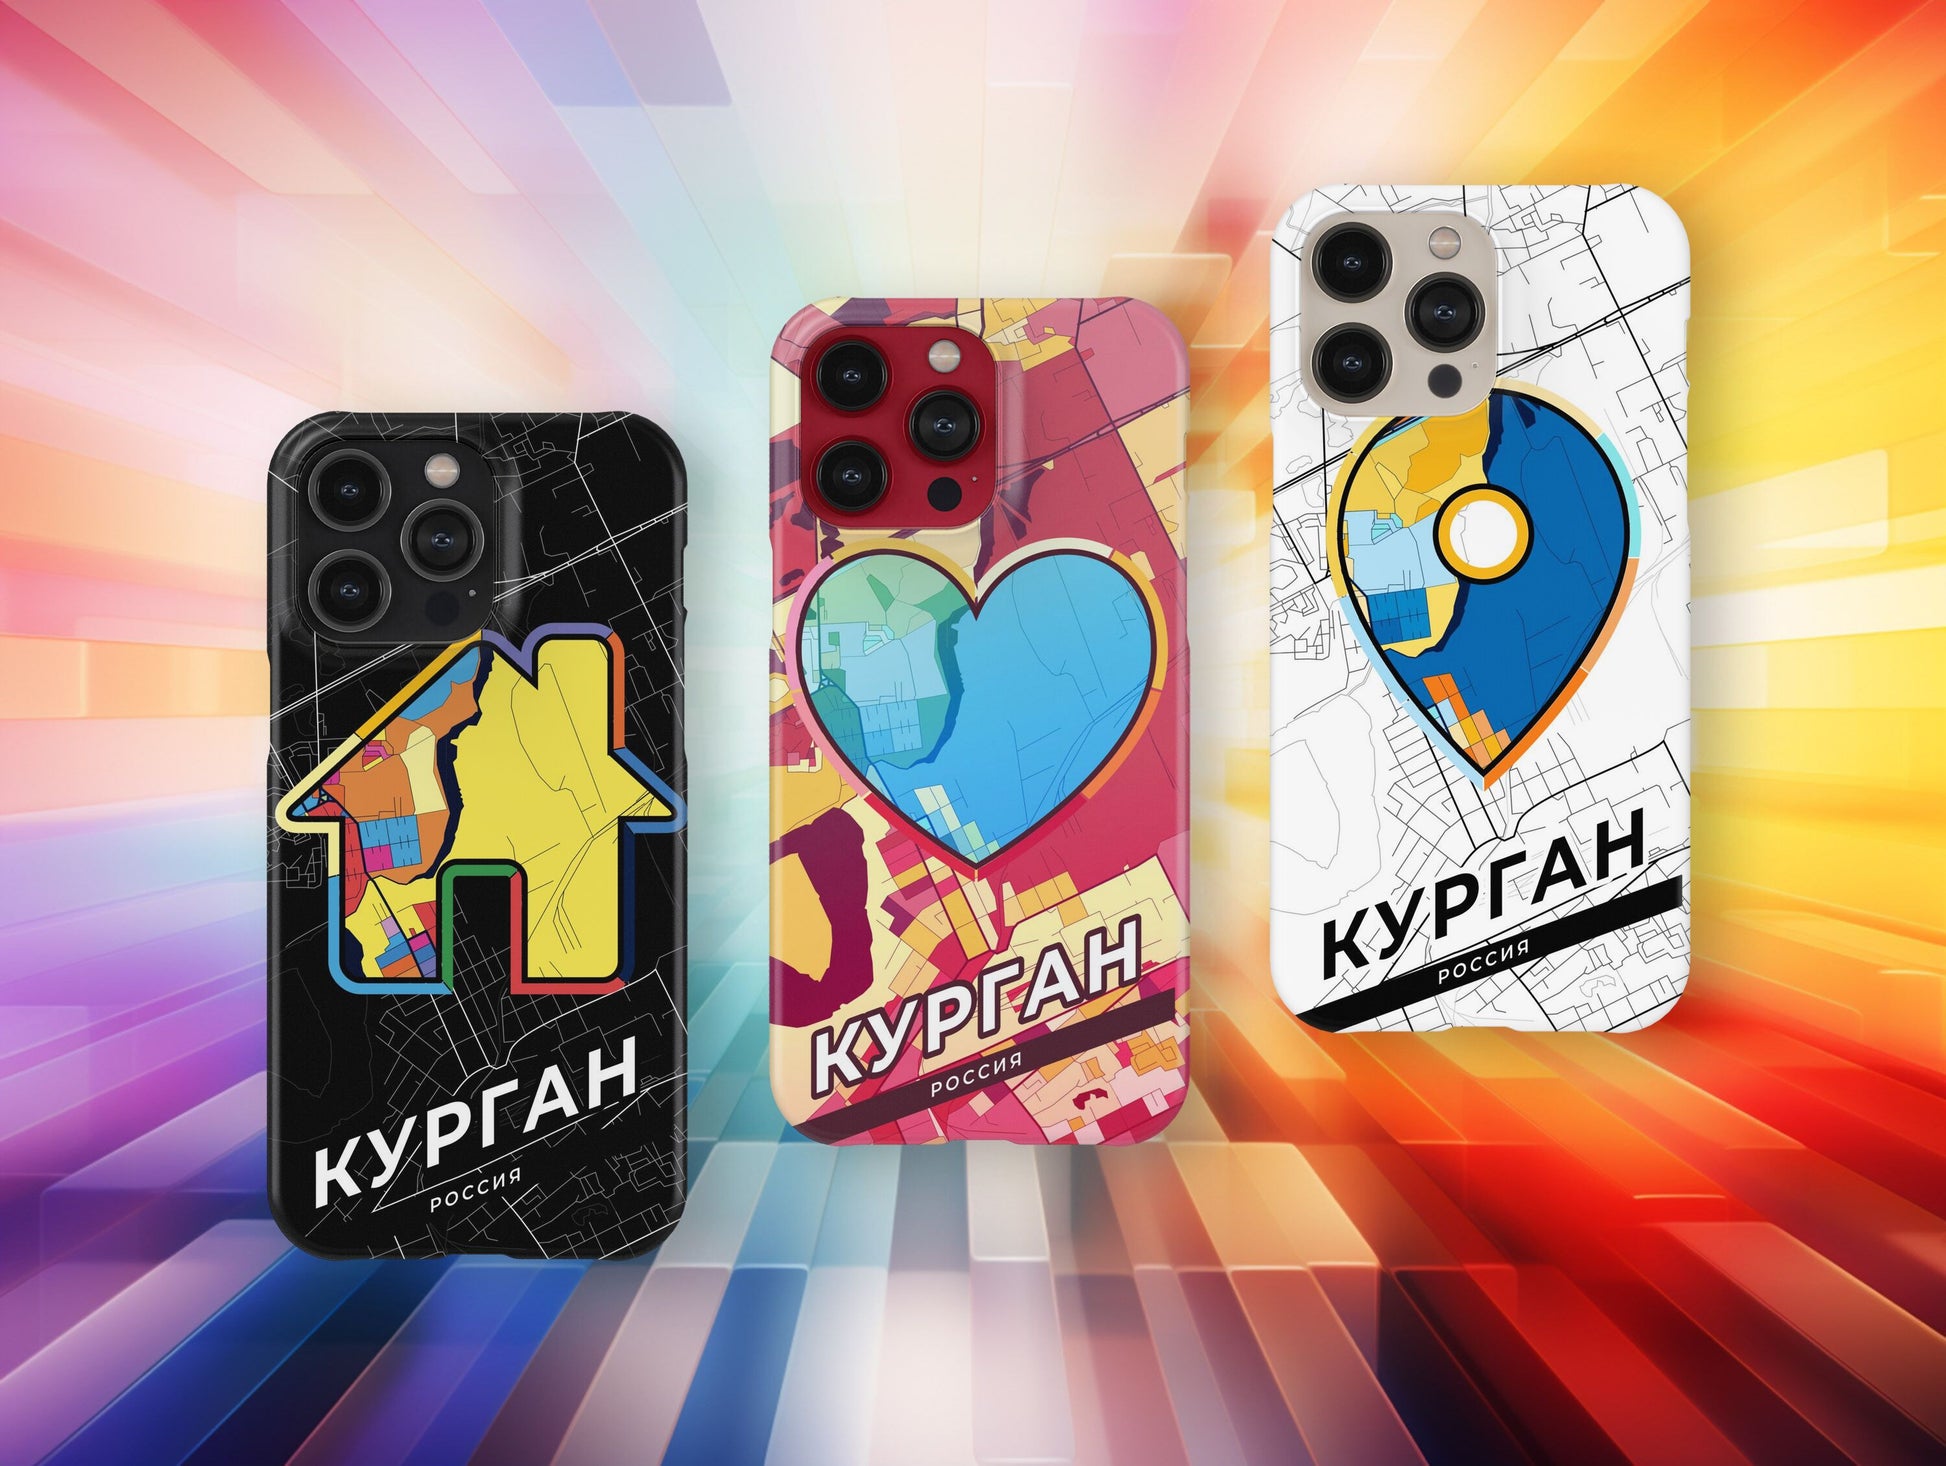 Kurgan Russia slim phone case with colorful icon. Birthday, wedding or housewarming gift. Couple match cases.